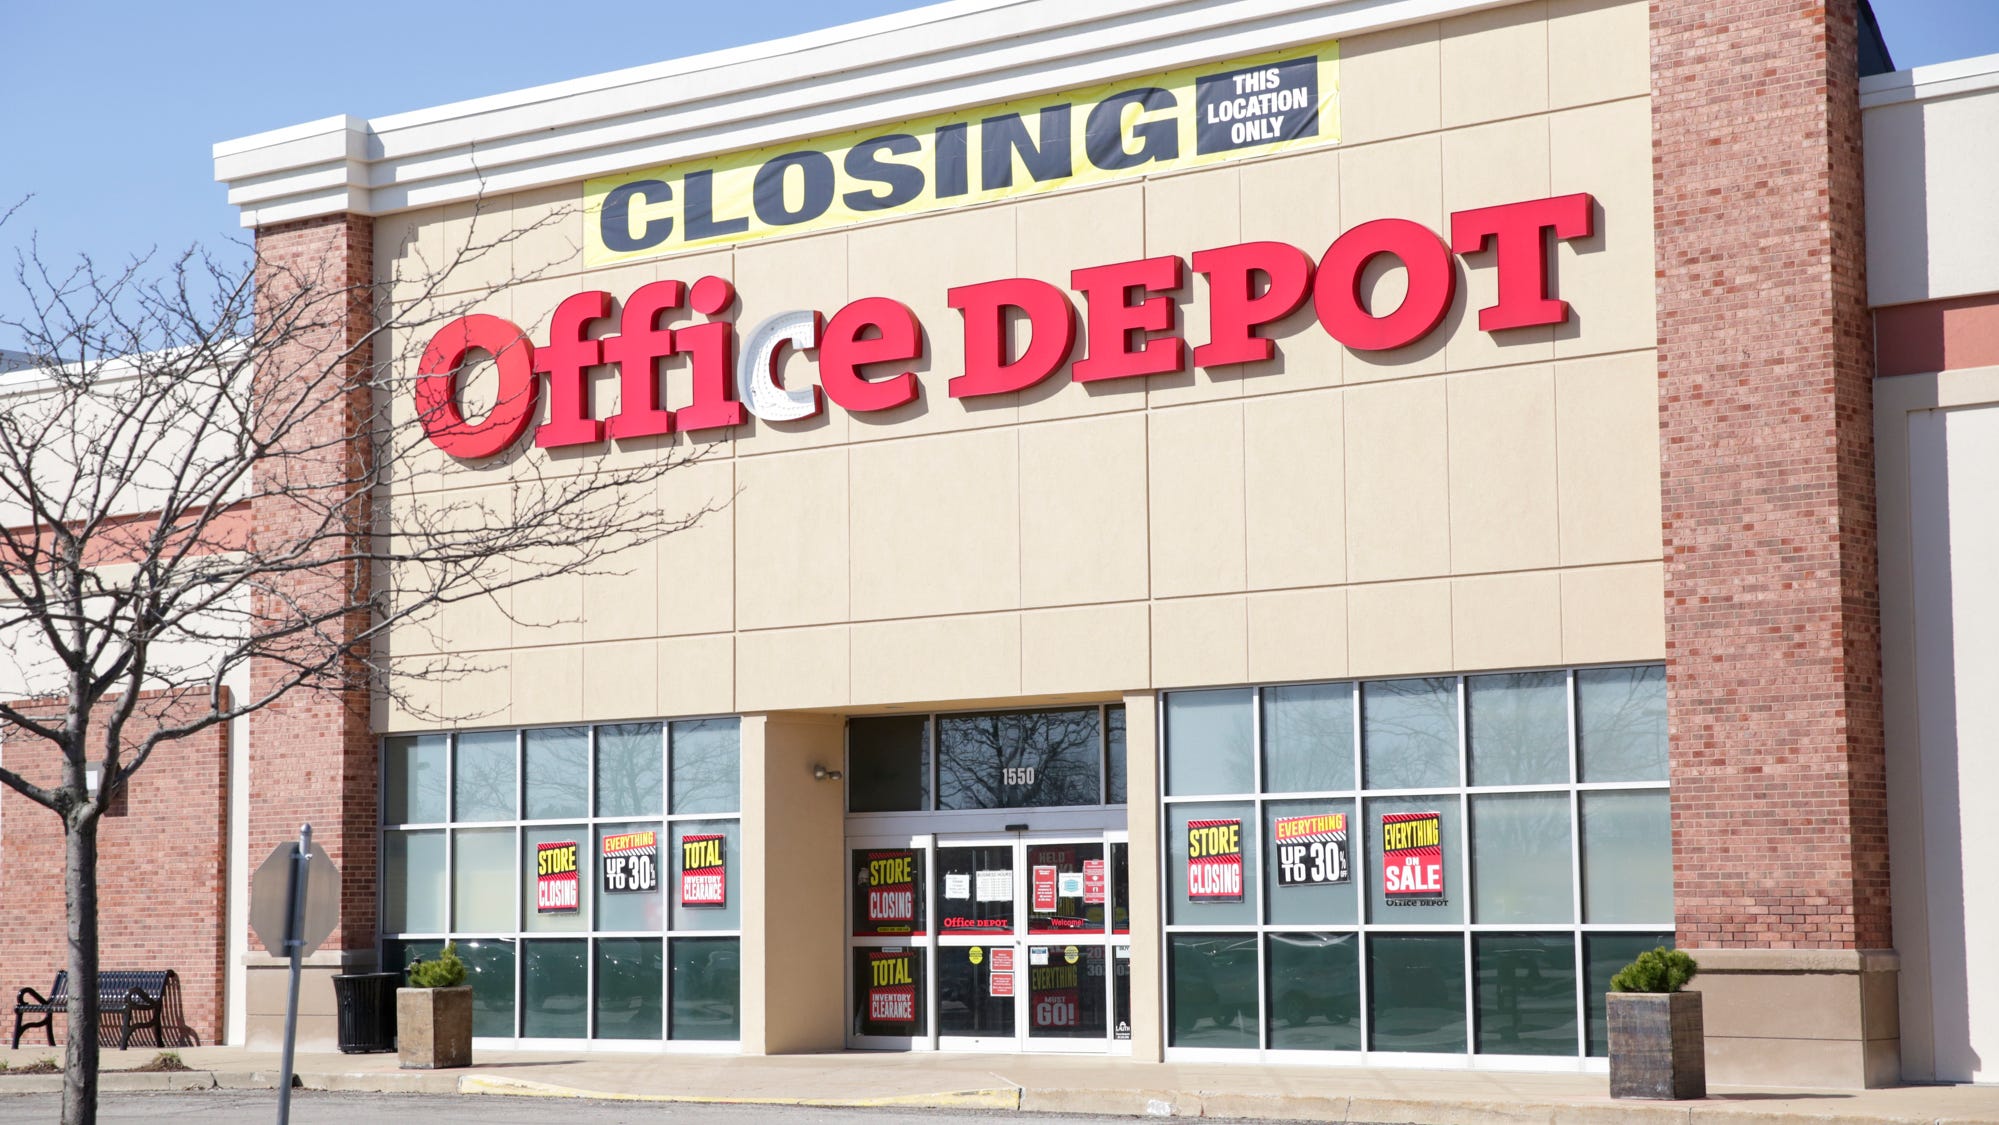 Lafayette's only Office Depot location to close in May, retailer says